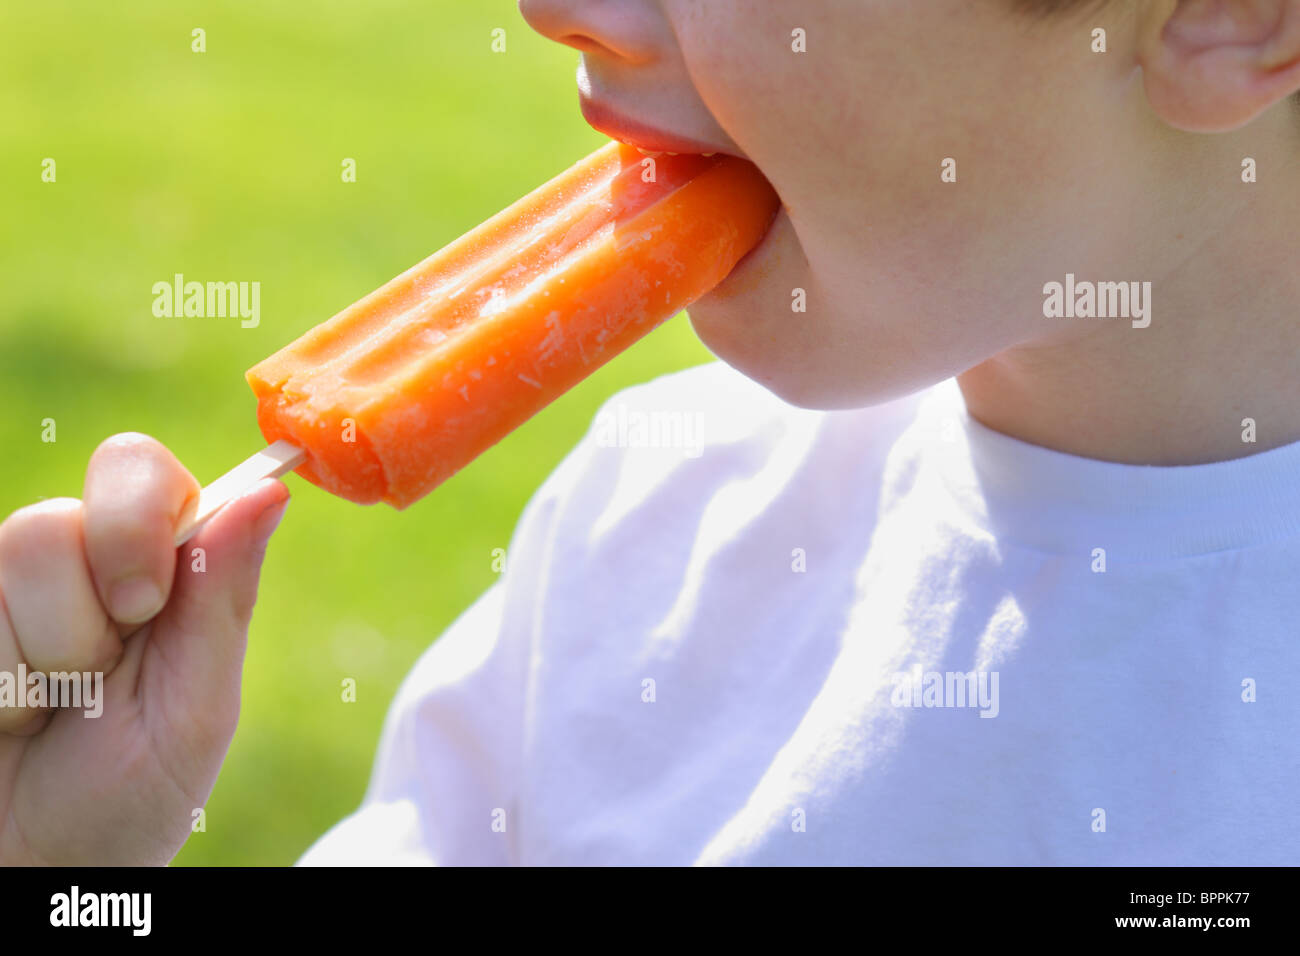 Closeup of child eating Popsicle Stock Photo